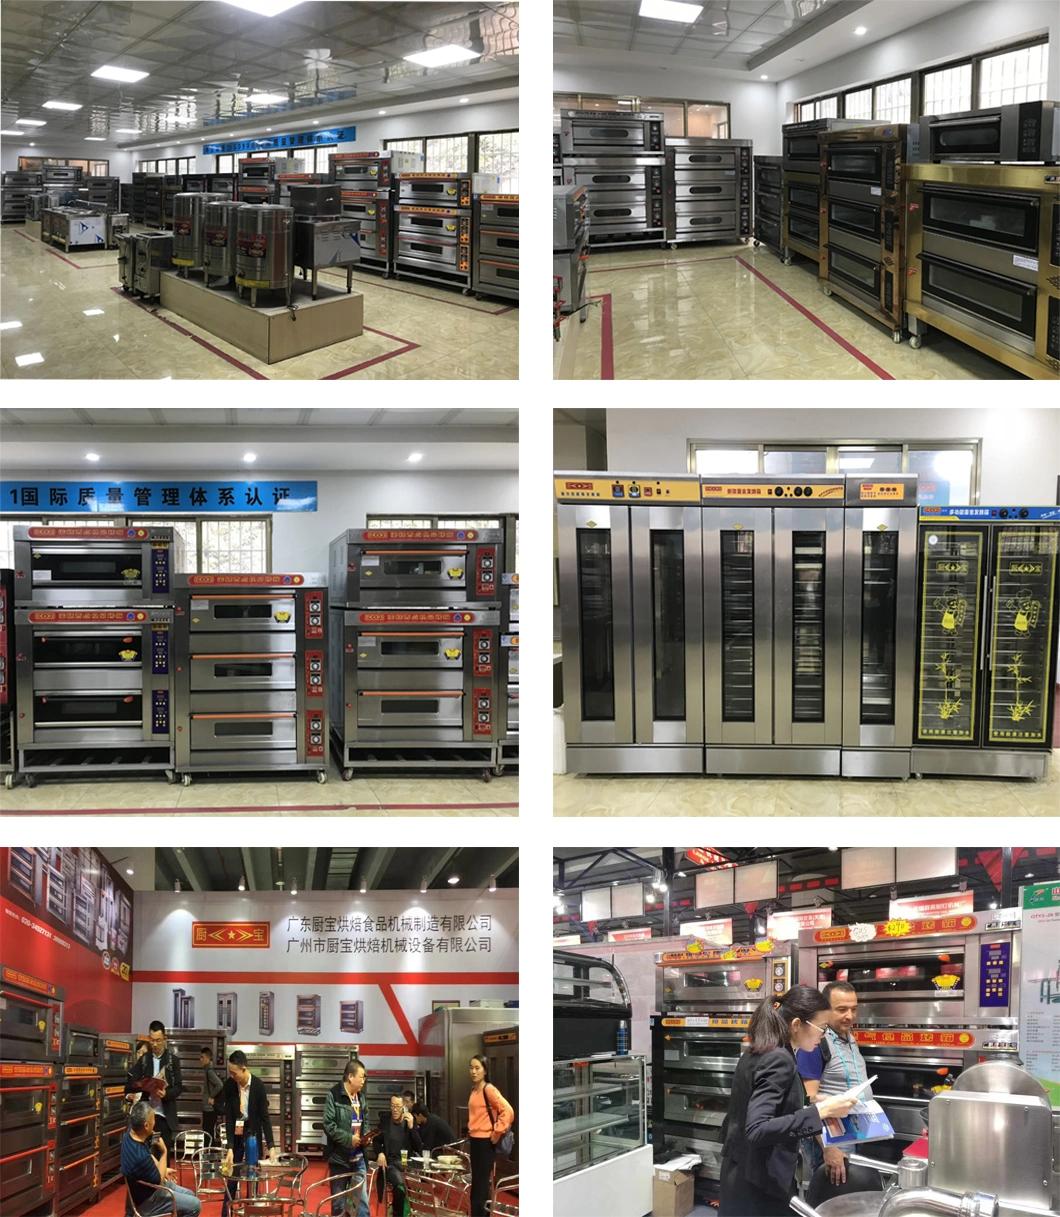 4 Deck 16 Trays Electric Oven for Commercial Restaurant Kitchen Baking Equipment Bakery Machinery Food Oven